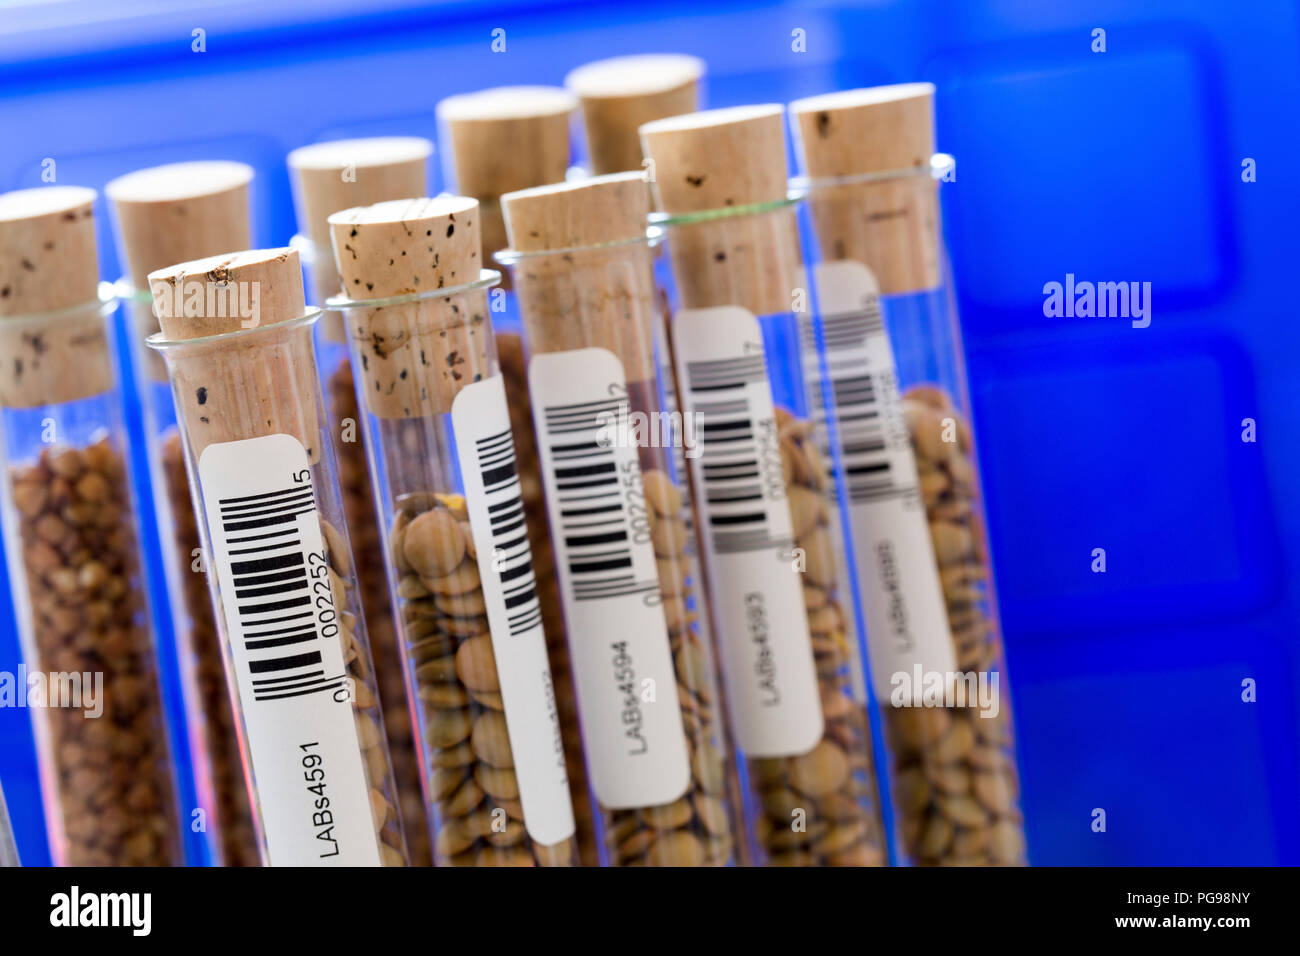 Agriculture research, conceptual image. Stock Photo